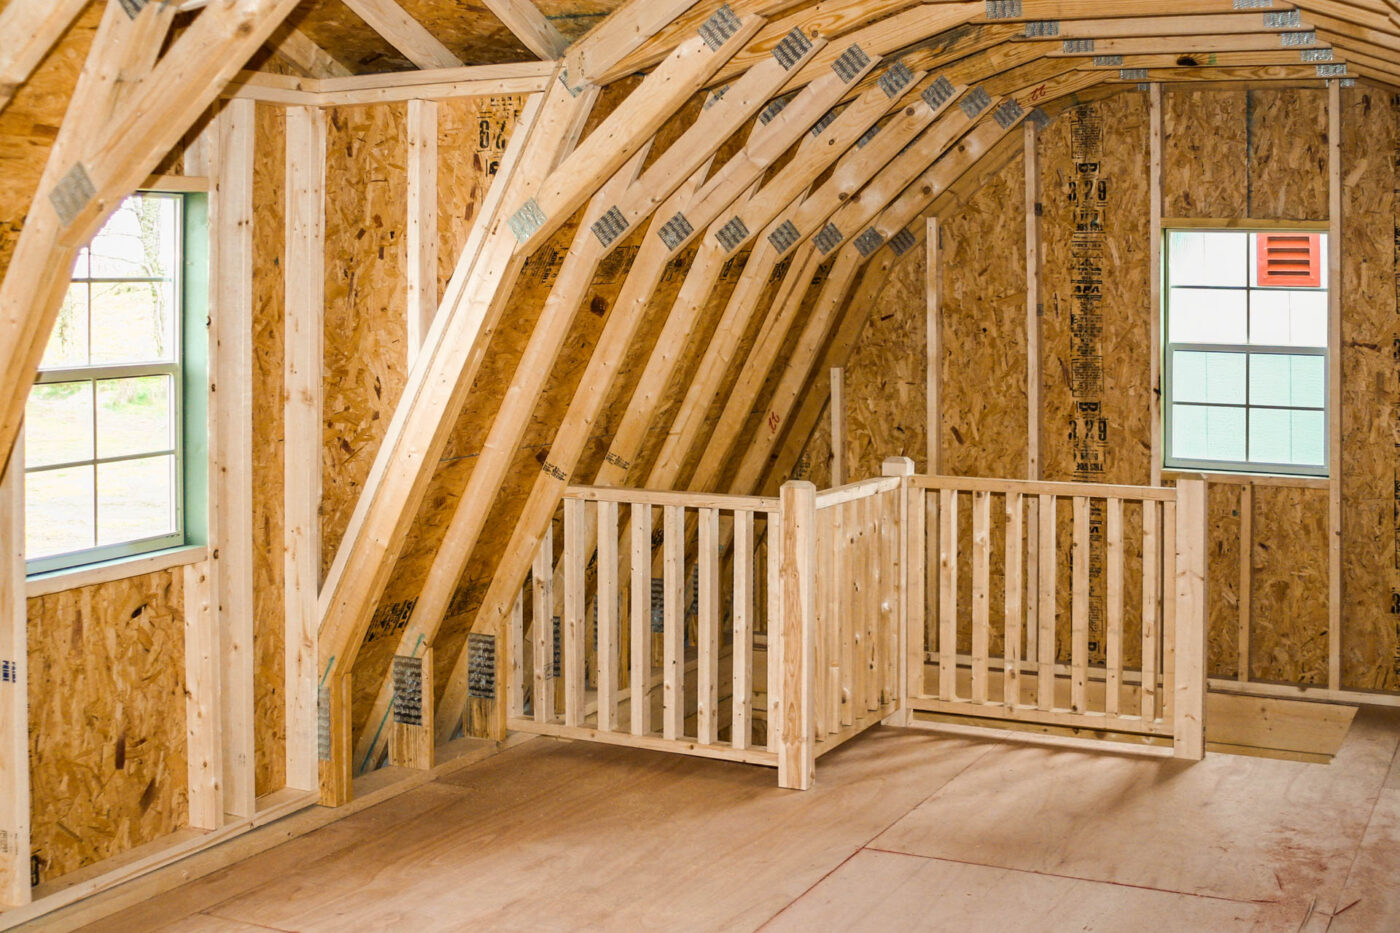 The interior of a maxibarn garage with attic trusses.